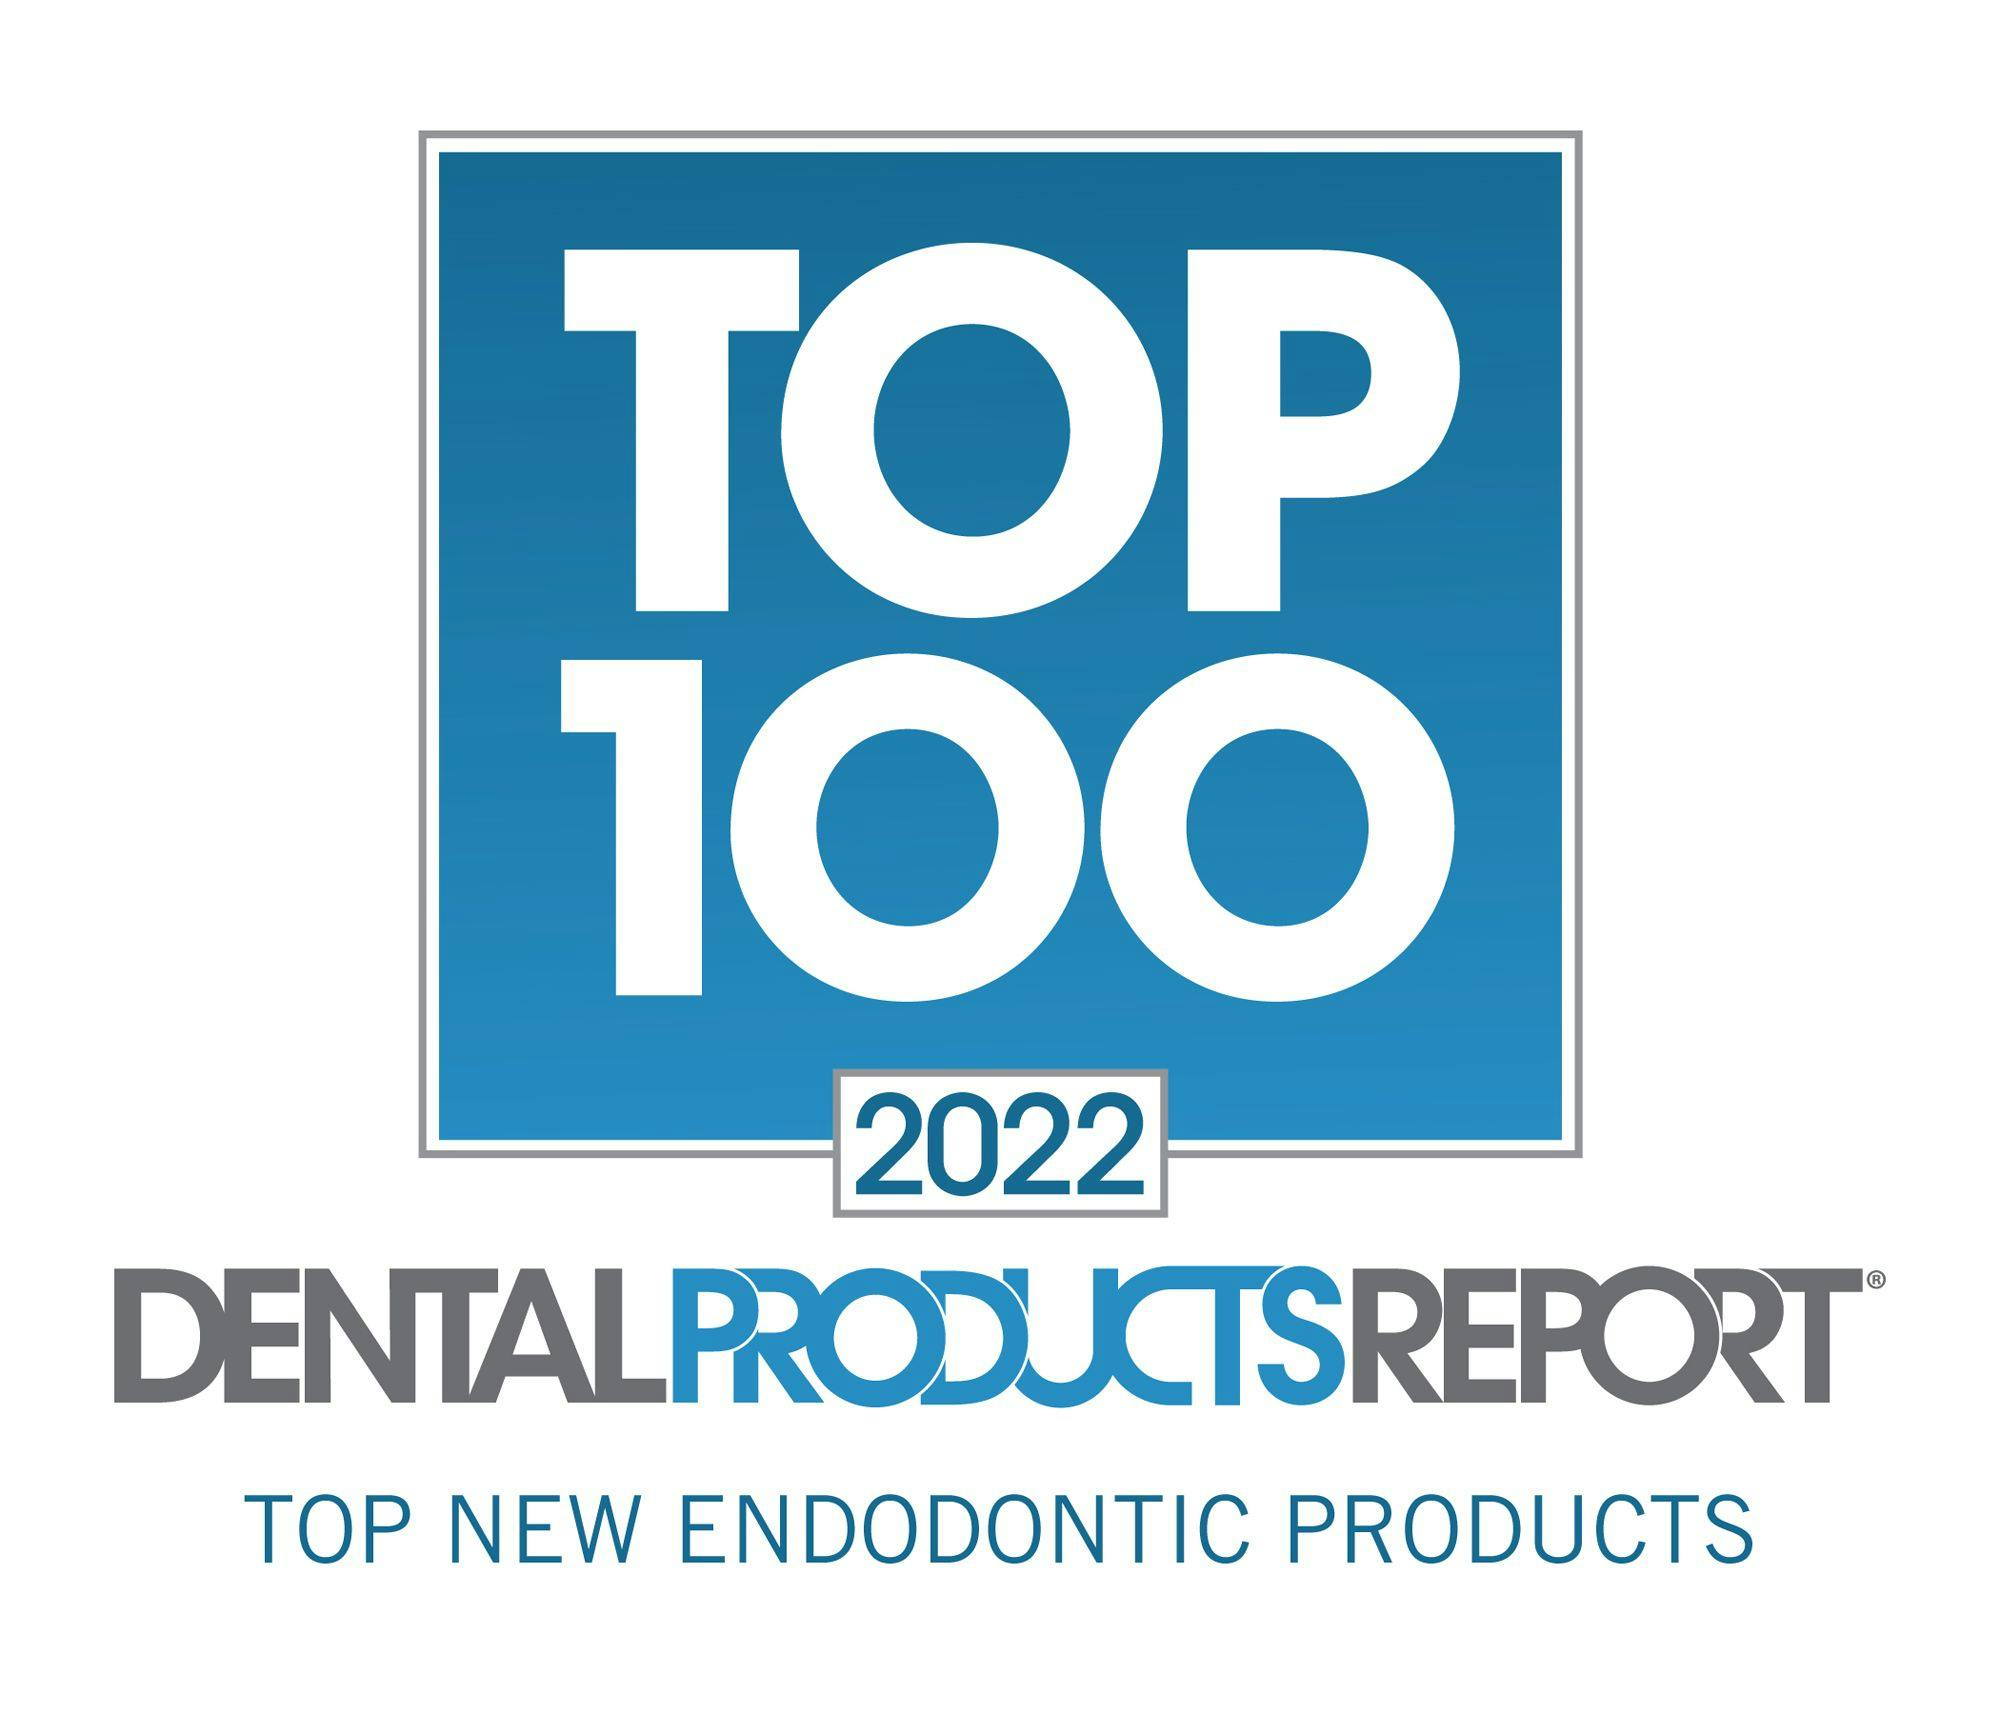 Top 5 New Endodontic Products of 2022